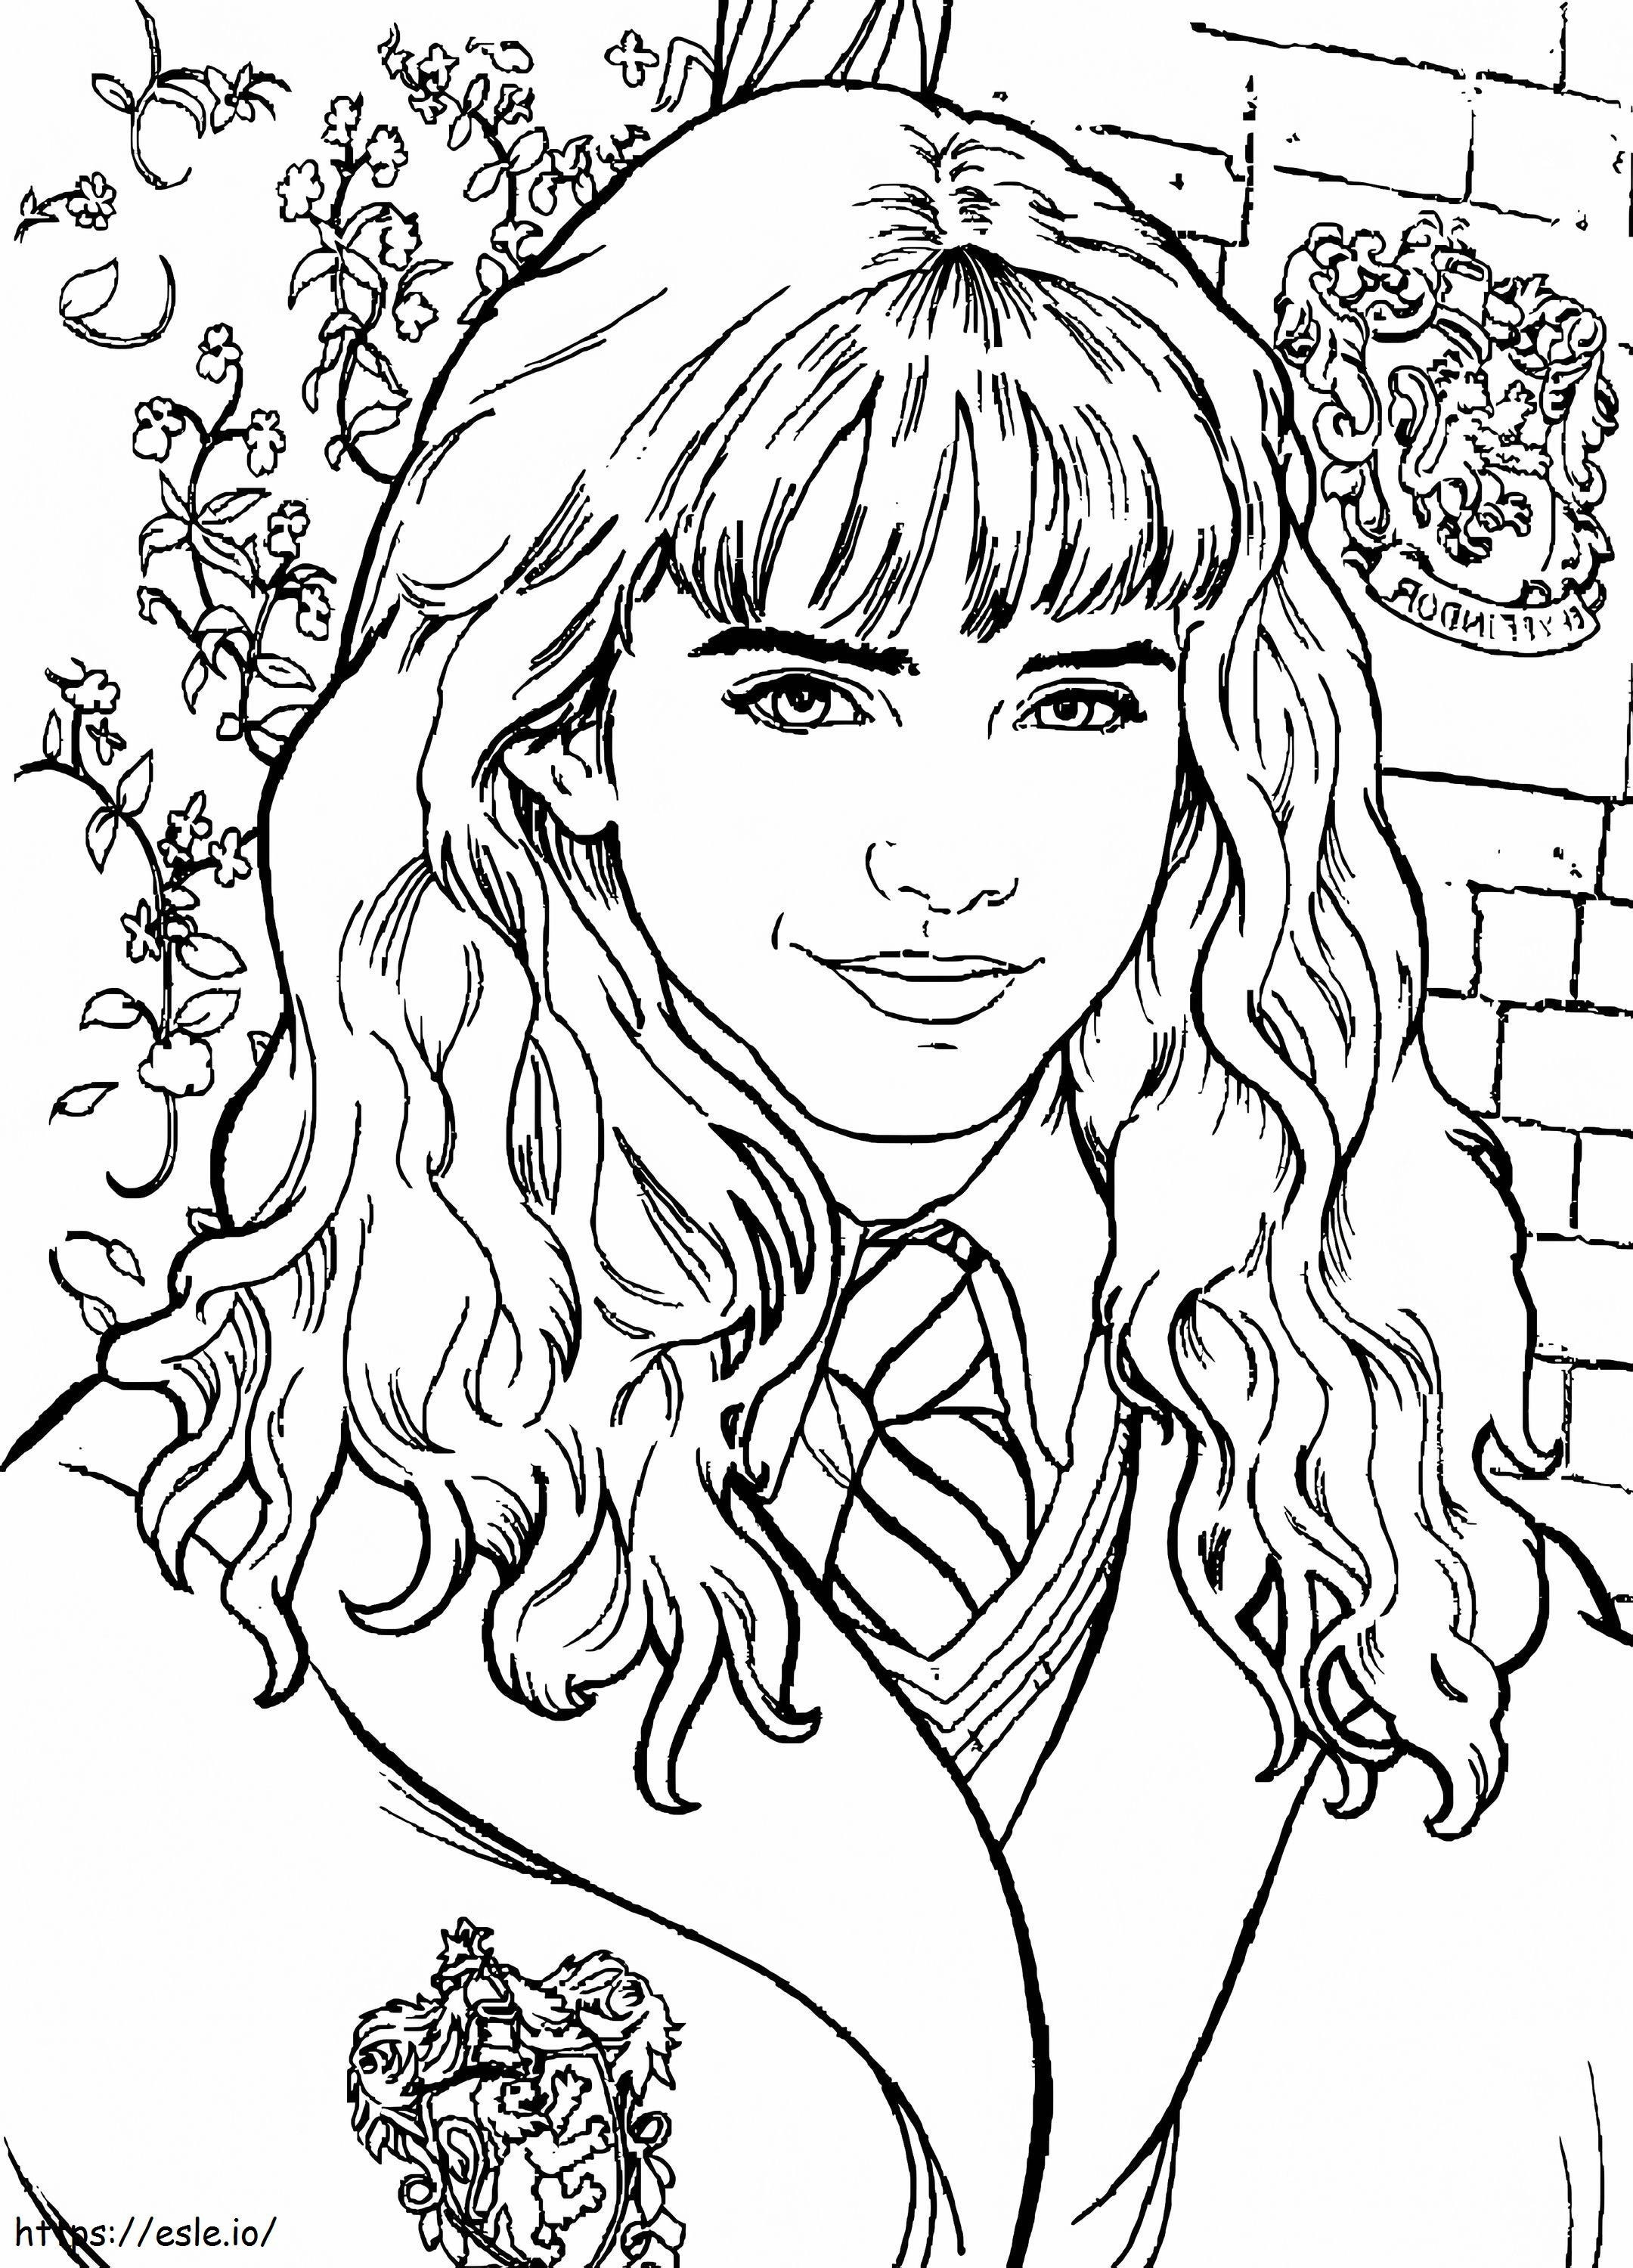 Hermione Granger Face coloring page